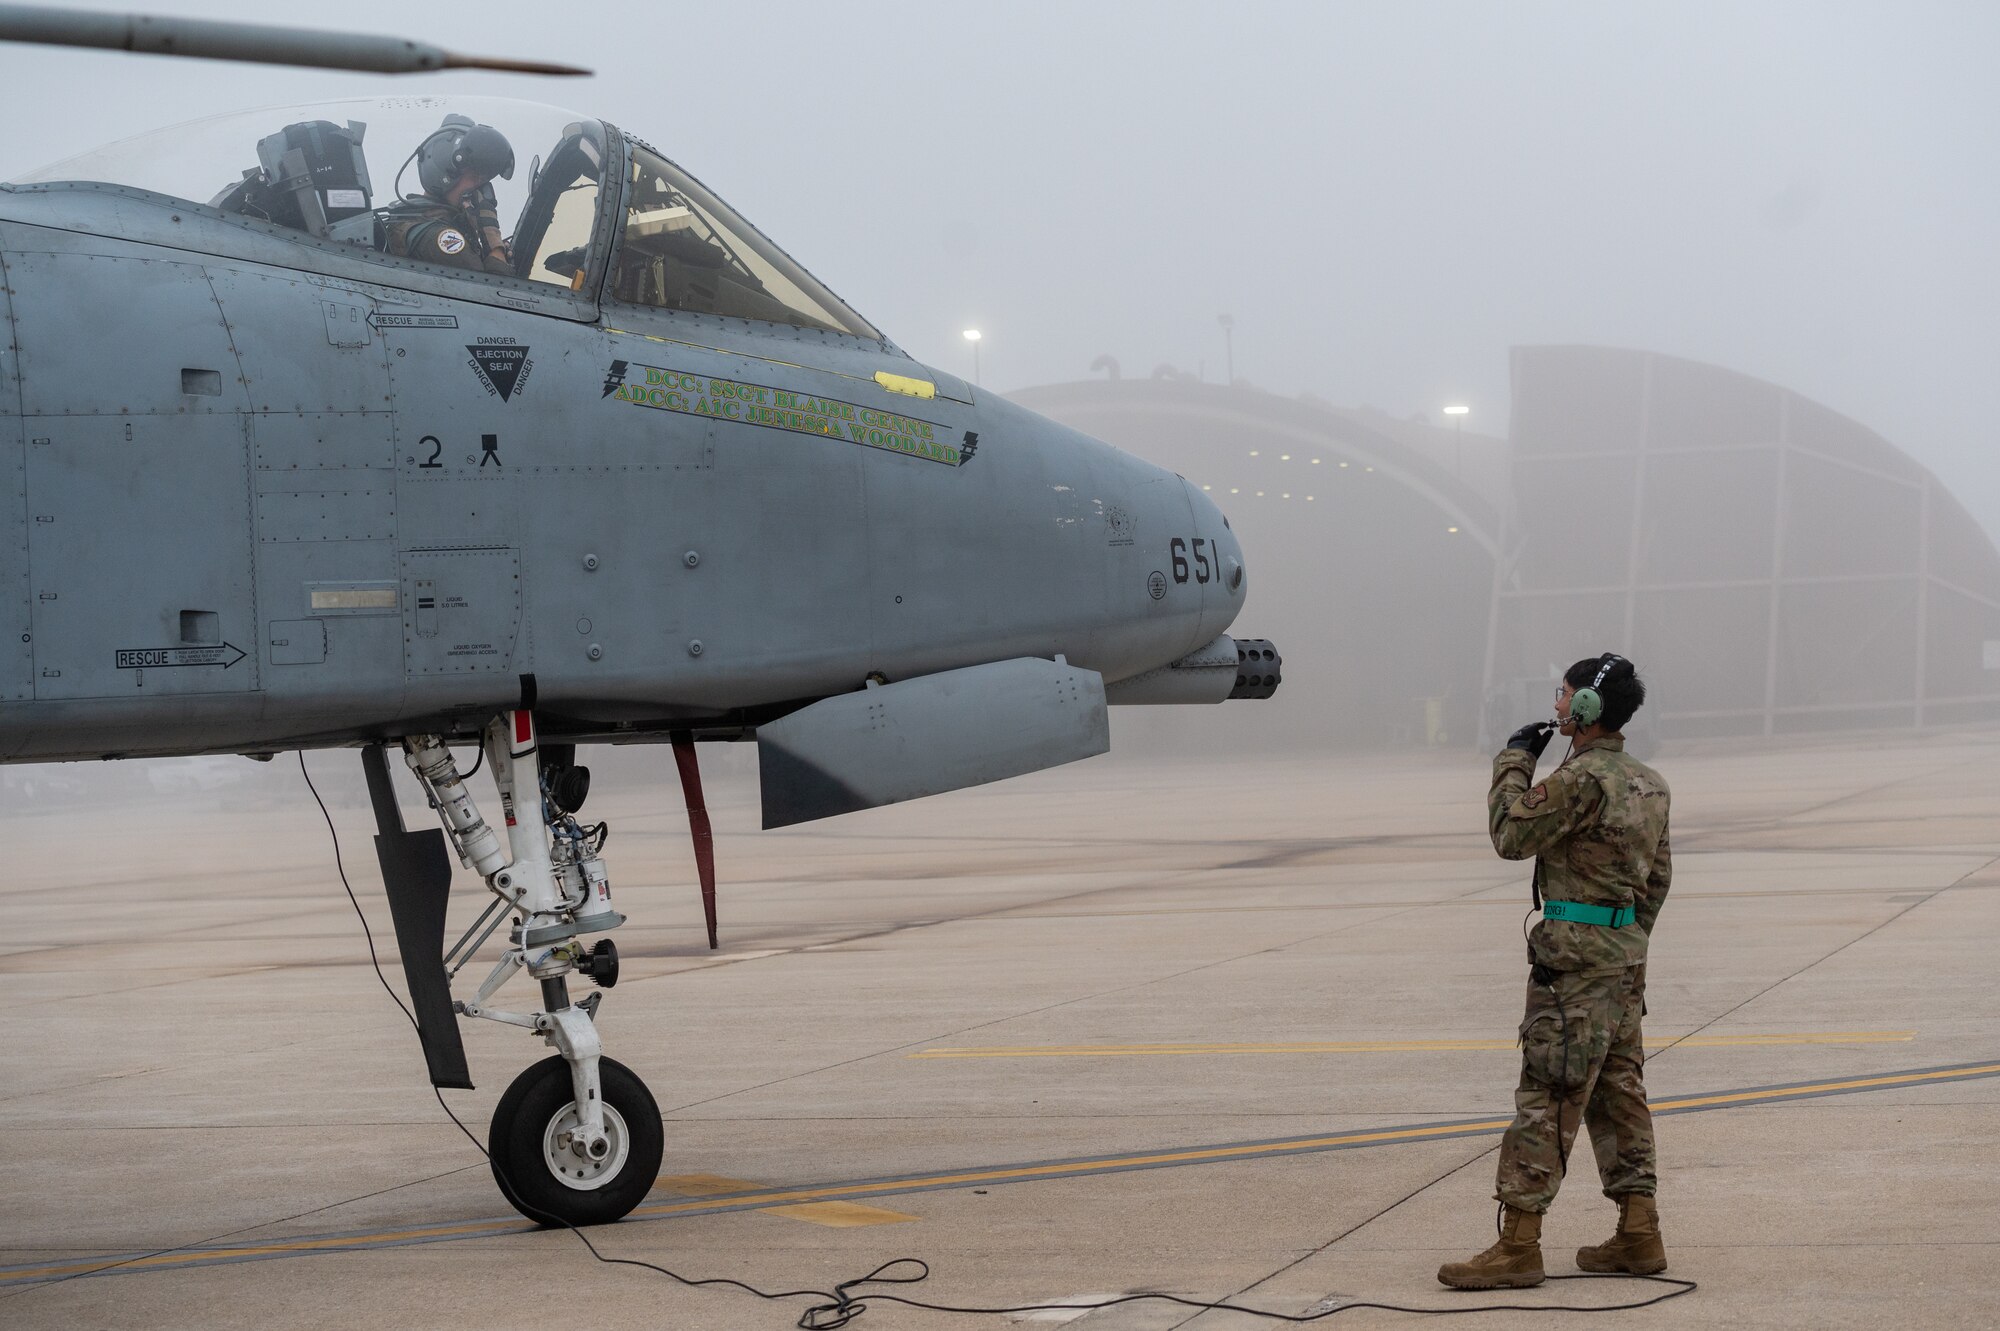 U.S. Air Force Capt. Jacob Bouck, 25th Fighter Squadron pilot, communicates from an A-10C Thunderbolt II with USAF Staff Sgt. John-Michael Salenga, 25th Fighter Generation Squadron crew chief, during preflight checks before takeoff in support of an agile combat employment (ACE) training sortie